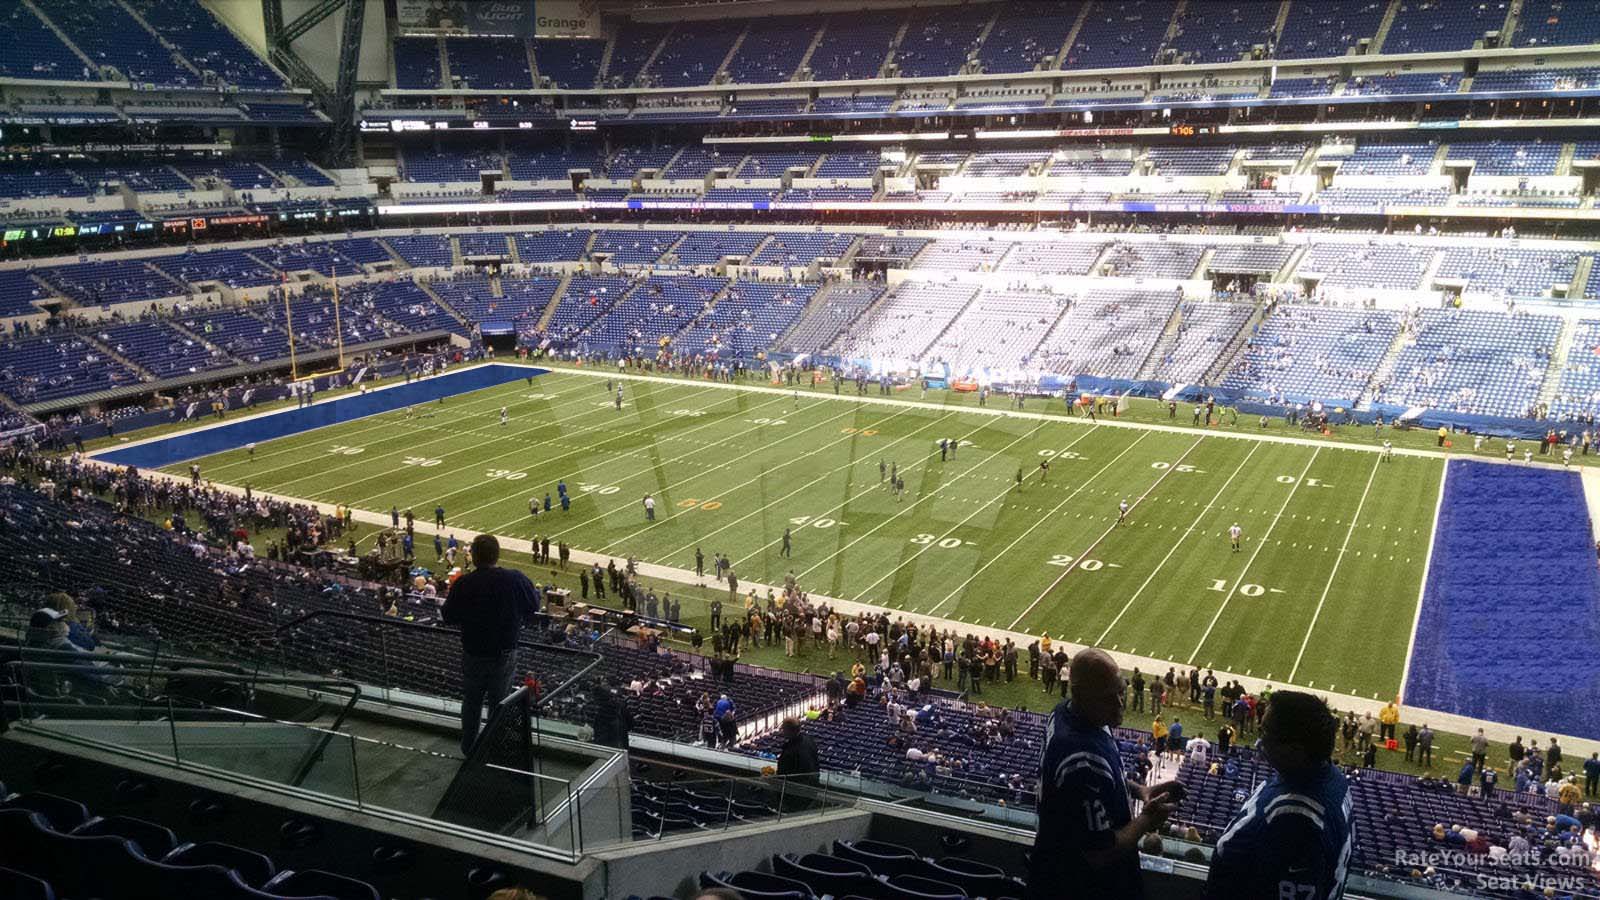 section 409, row 9 seat view  for football - lucas oil stadium